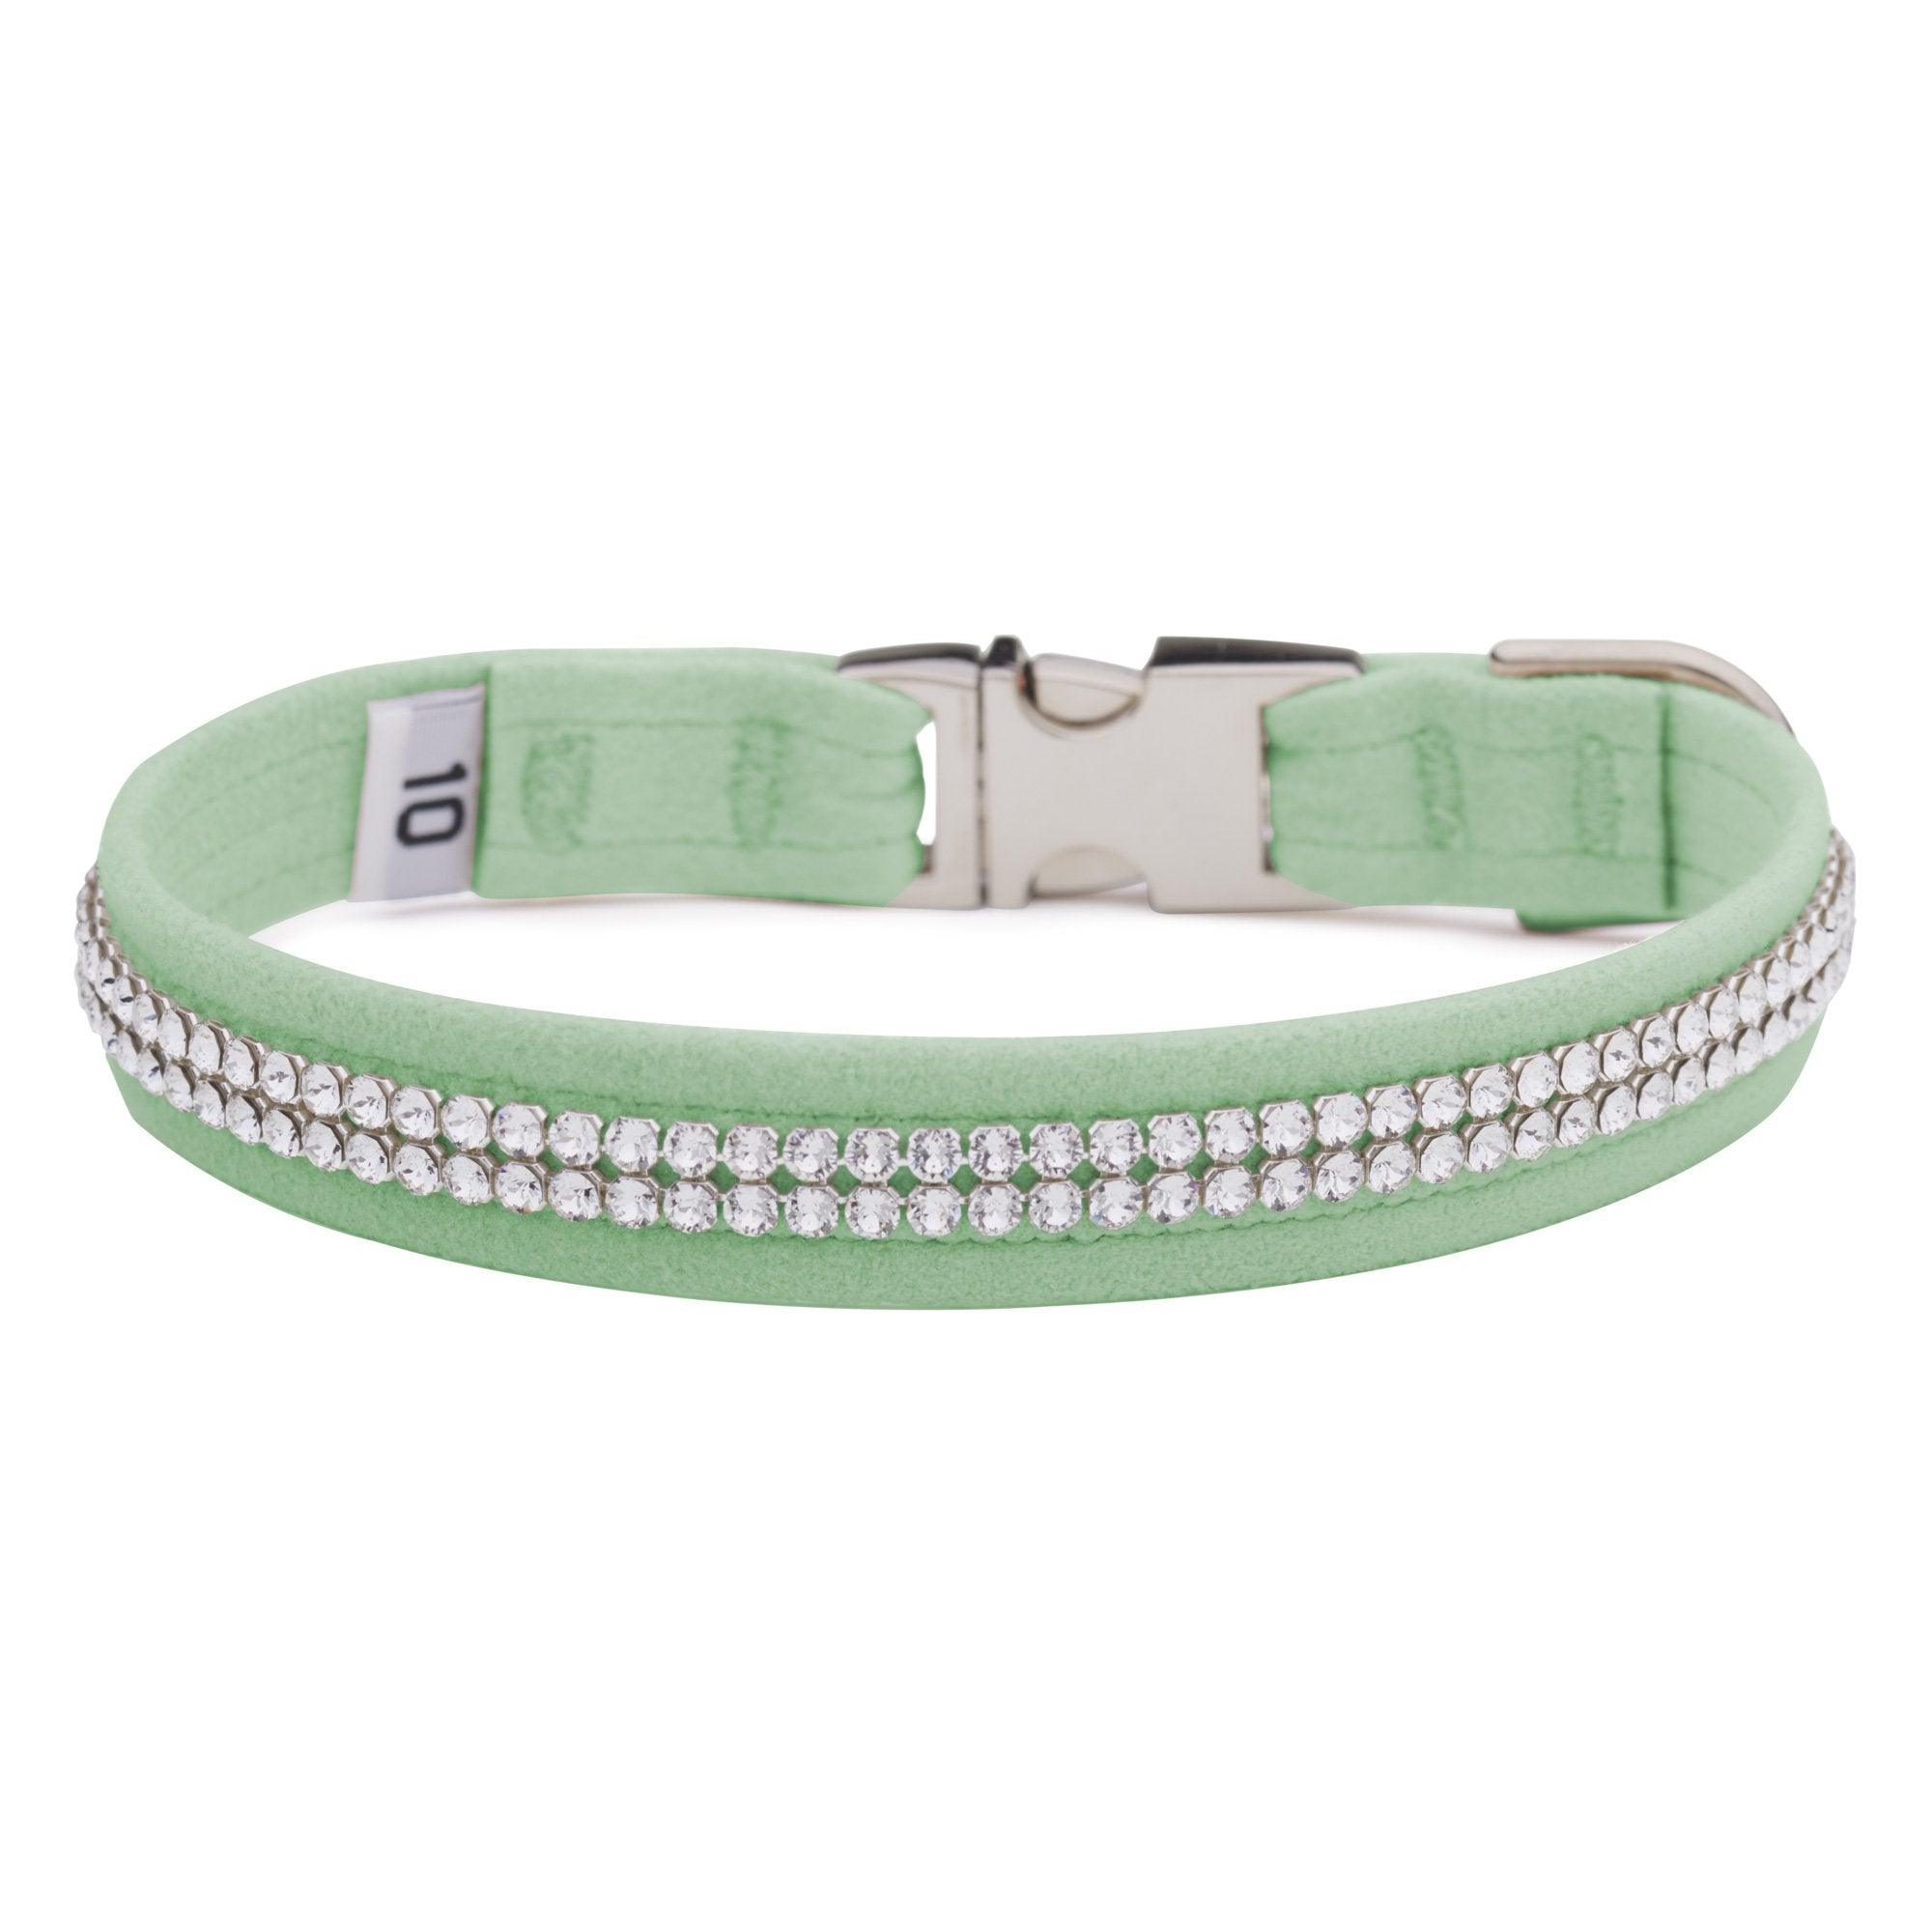 Mint 2 Row Giltmore Perfect Fit Collar - Rocky & Maggie's Pet Boutique and Salon